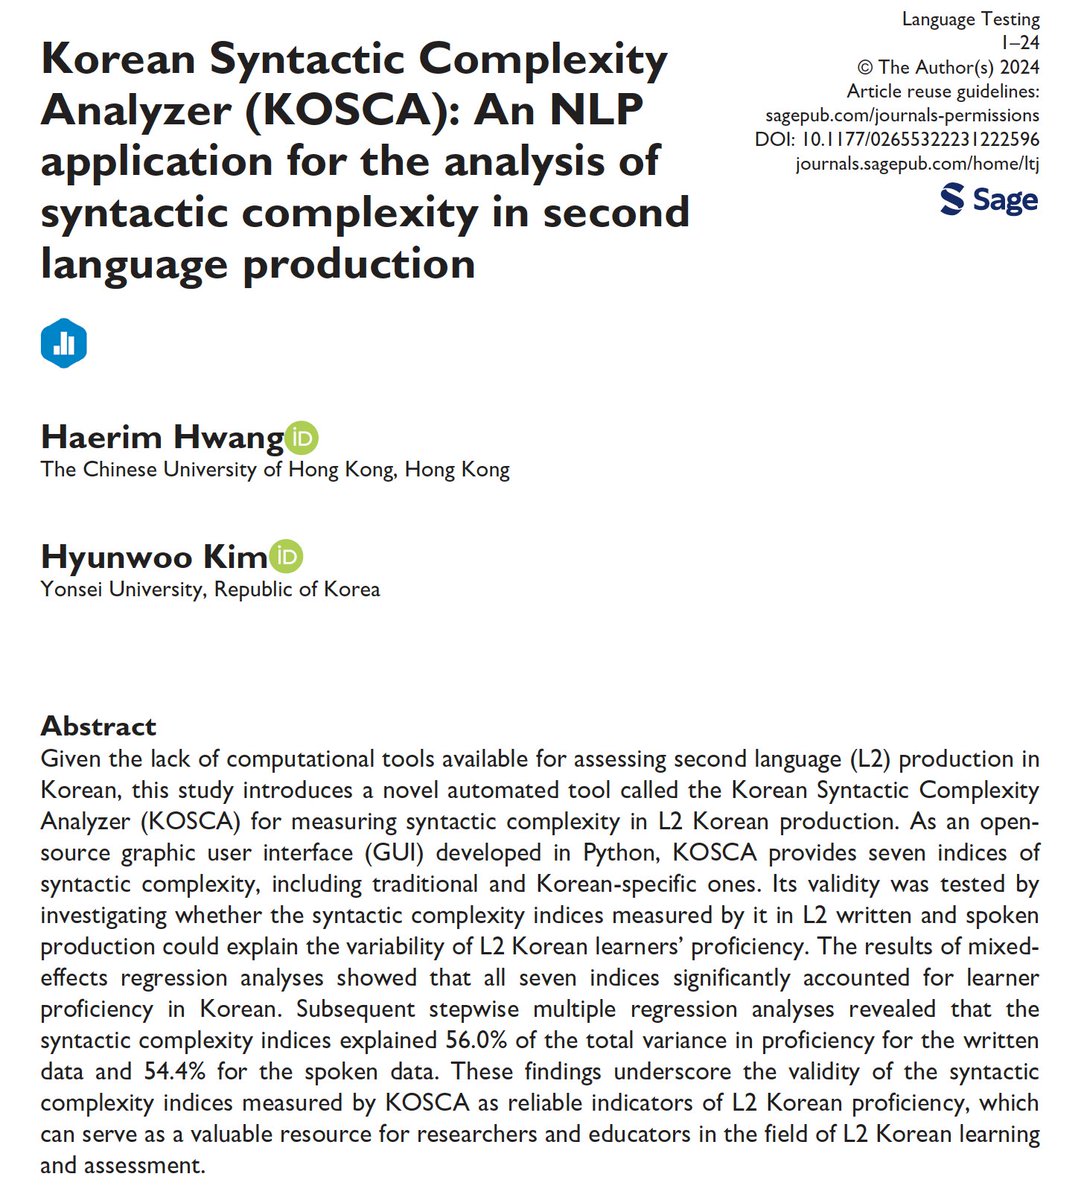 Now available in Online First, Haerim Hwang (@CUHKofficial) and Hyunwoo Kim (@yonsei_u) present a new open-source application for measuring syntactic complexity in L2 Korean production. journals.sagepub.com/doi/abs/10.117…